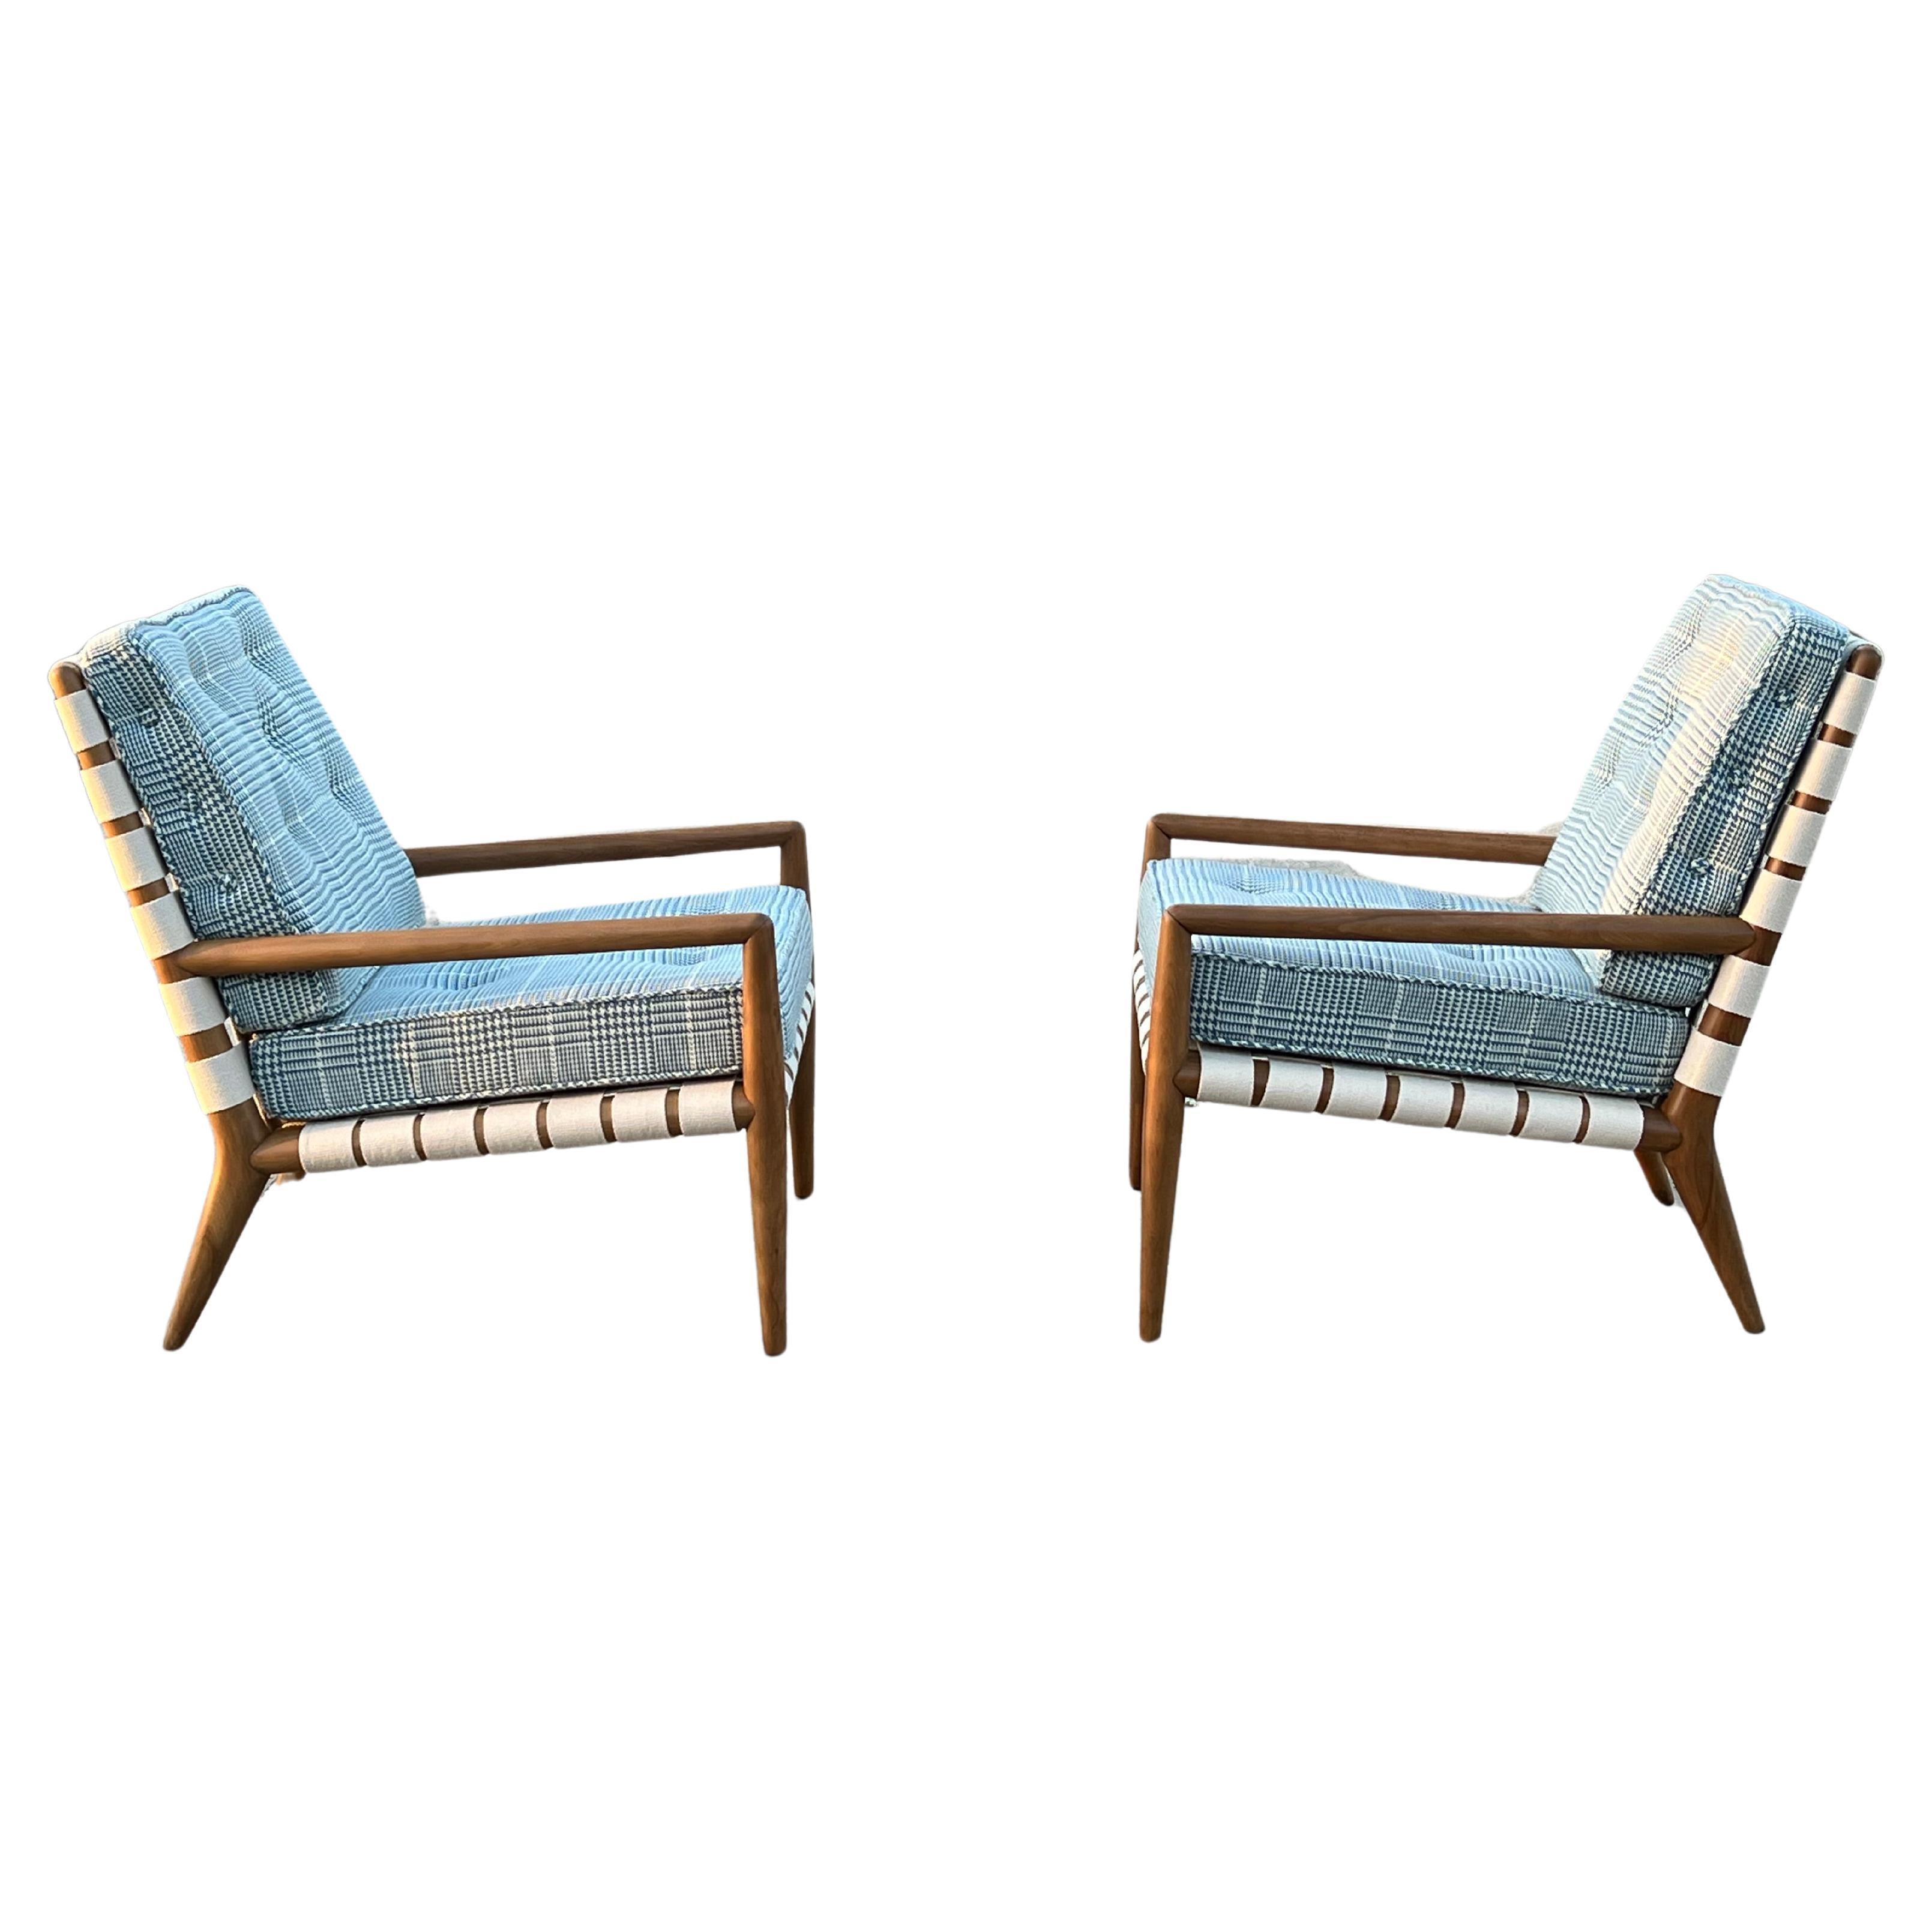 A Pair Of T.H.Robsjohn-Gibbings Strap Lounge Chairs Vintage 1950's  For Sale